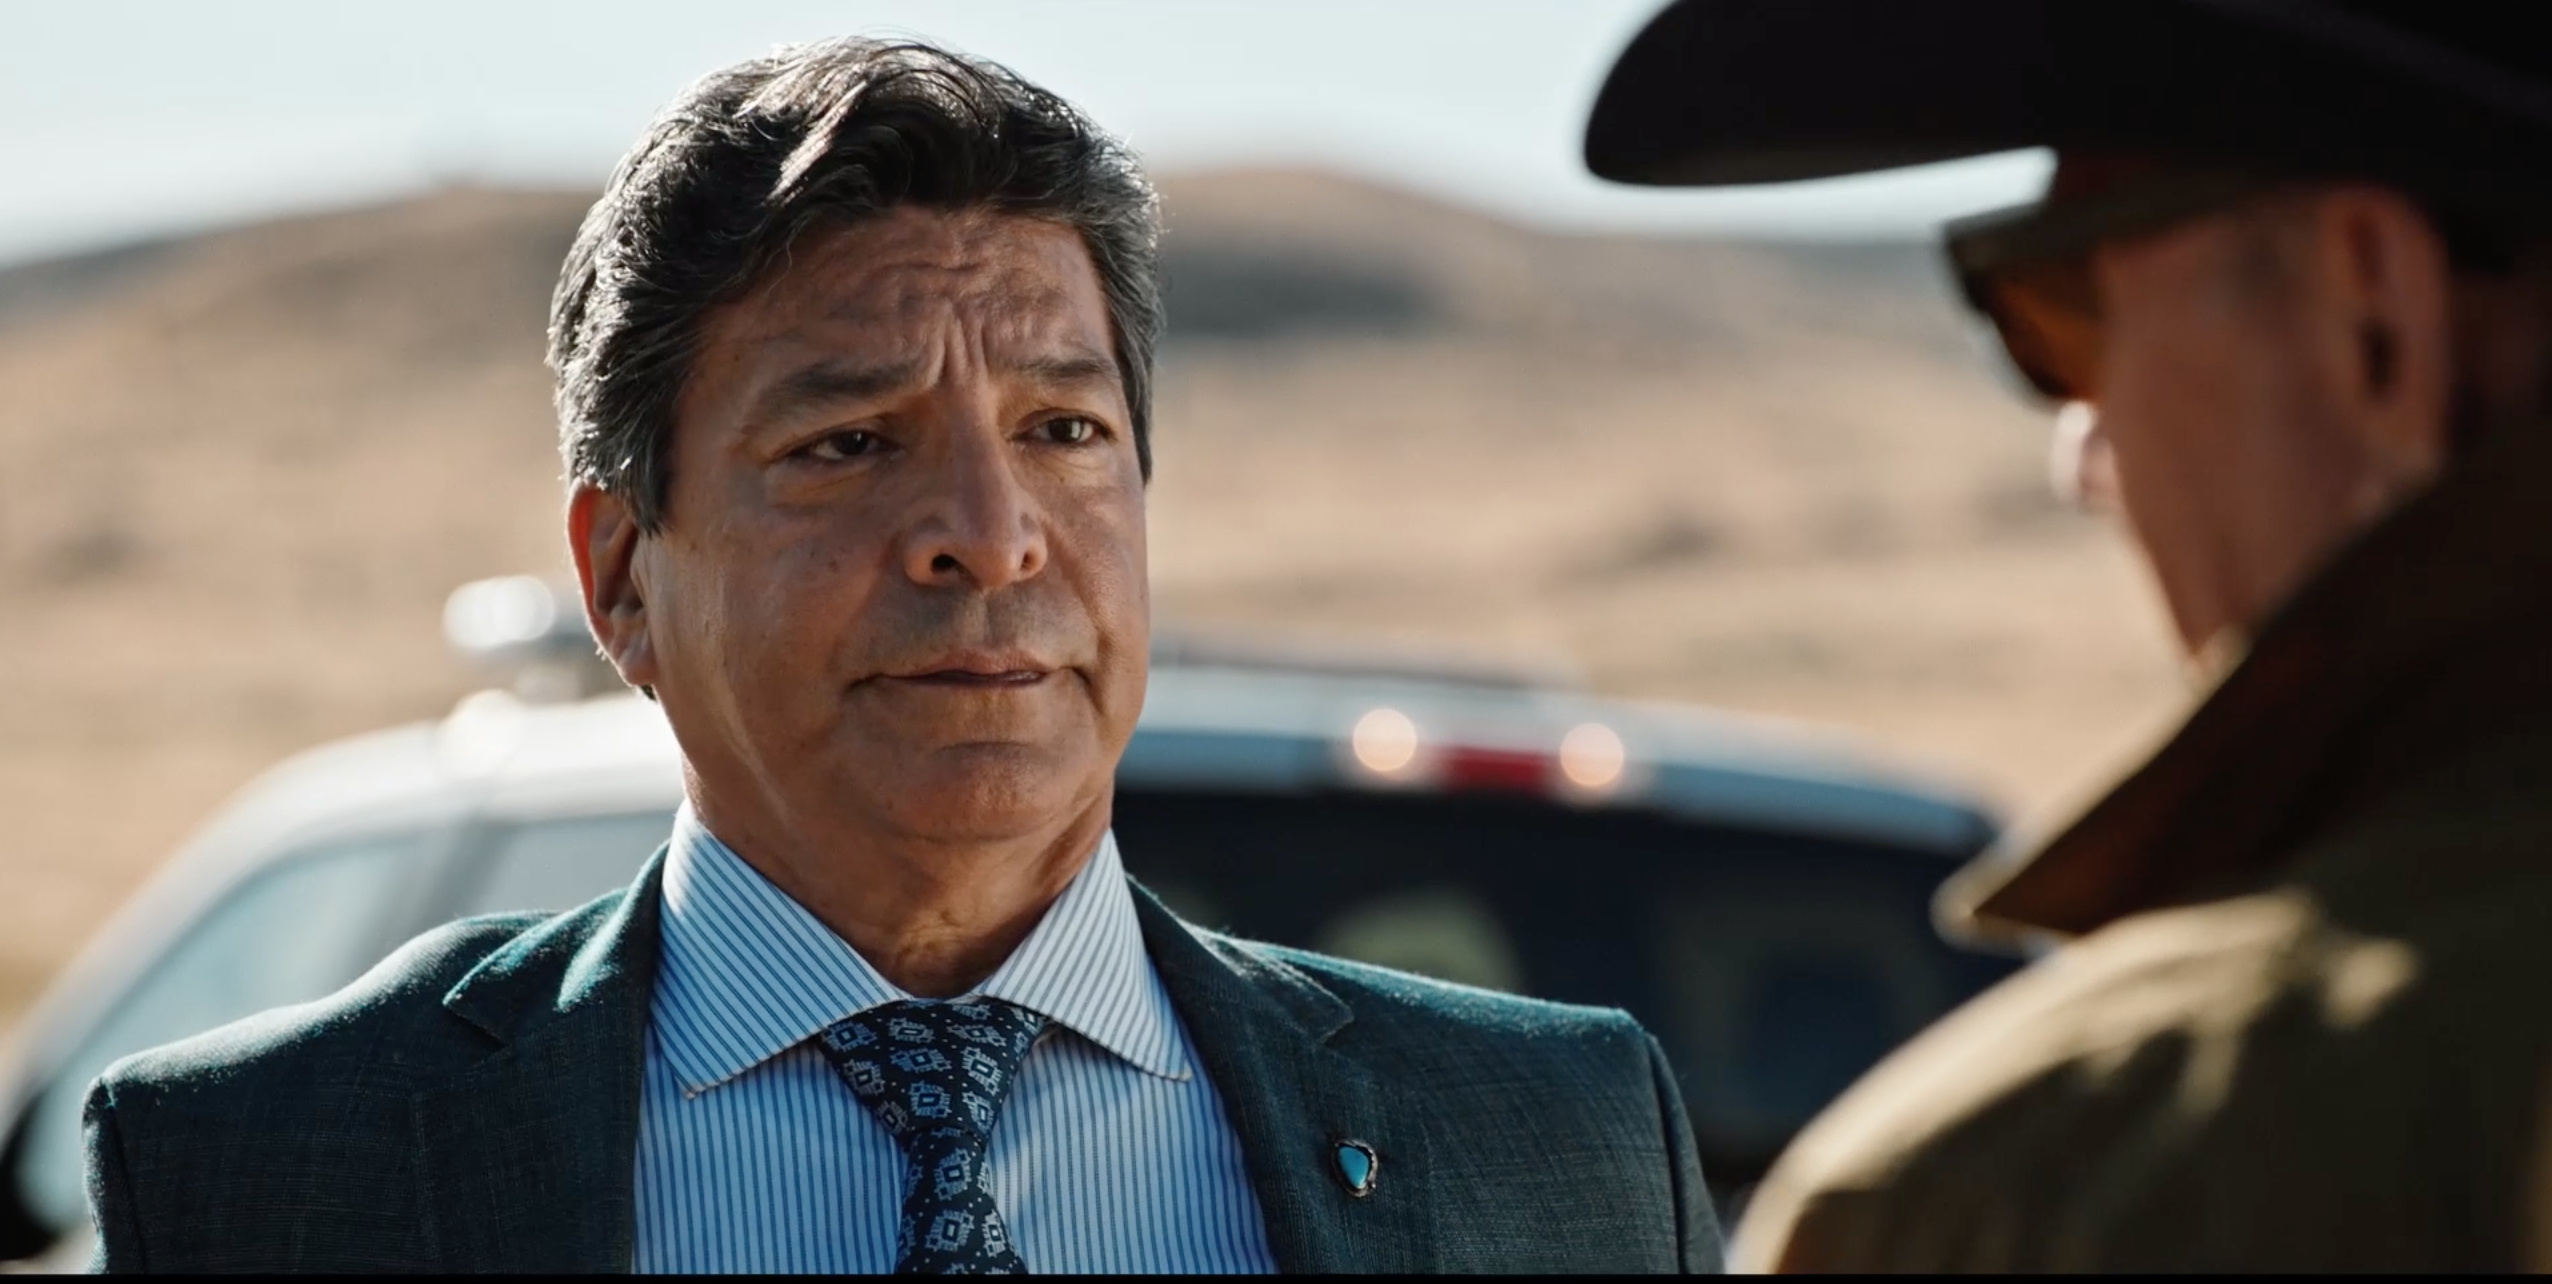 Gil Birmingham, Exclusive interview, Yellowstone insights, Hollywood actor, 2560x1290 HD Desktop